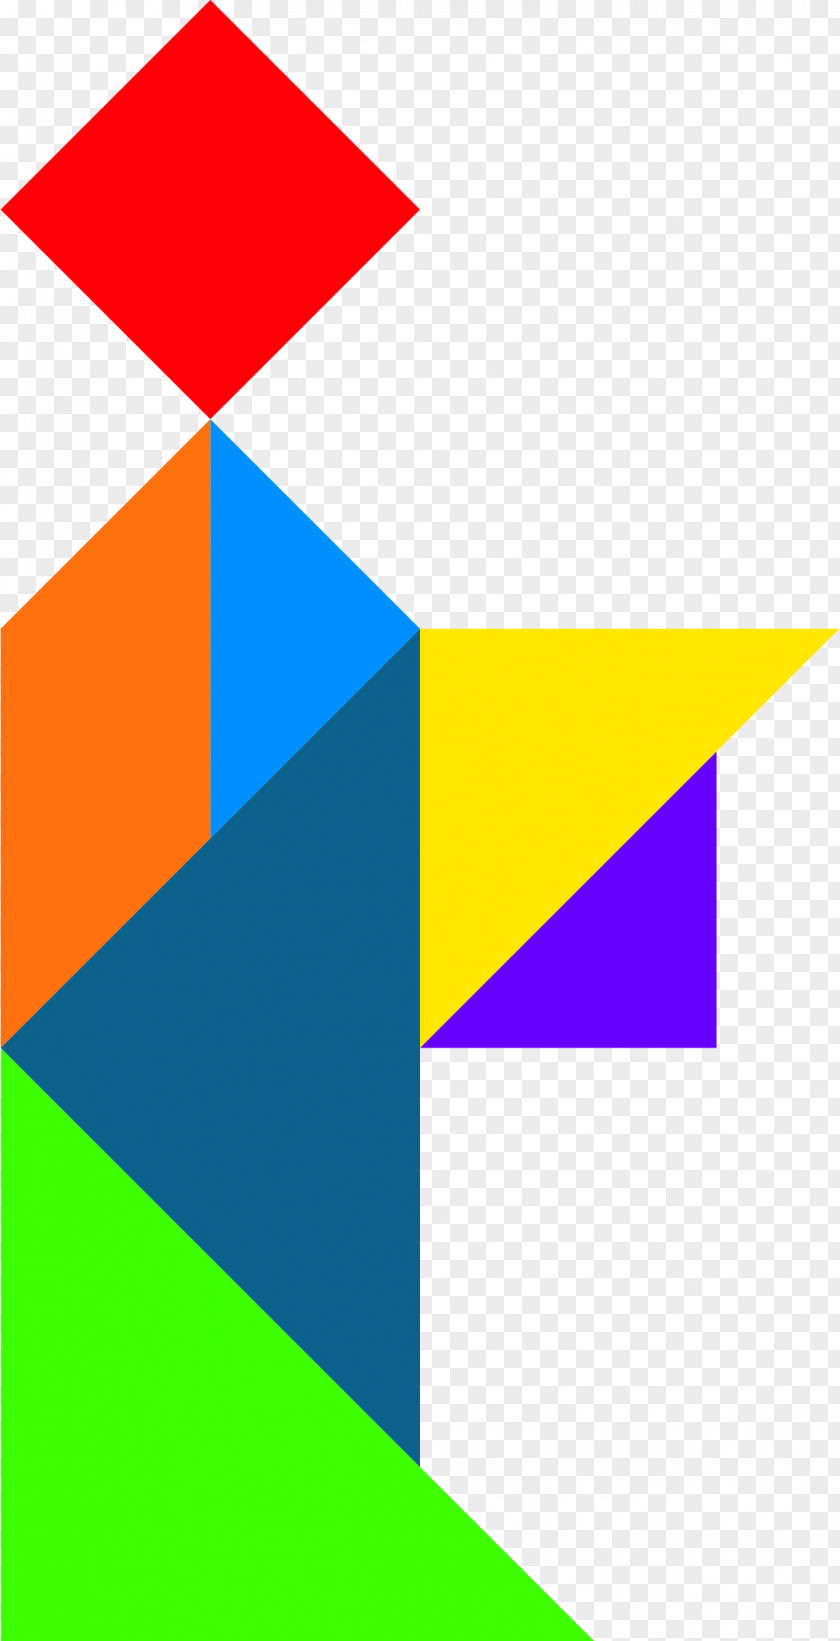 Geometry People Tangram Puzzle Triangle Logo Clip Art PNG